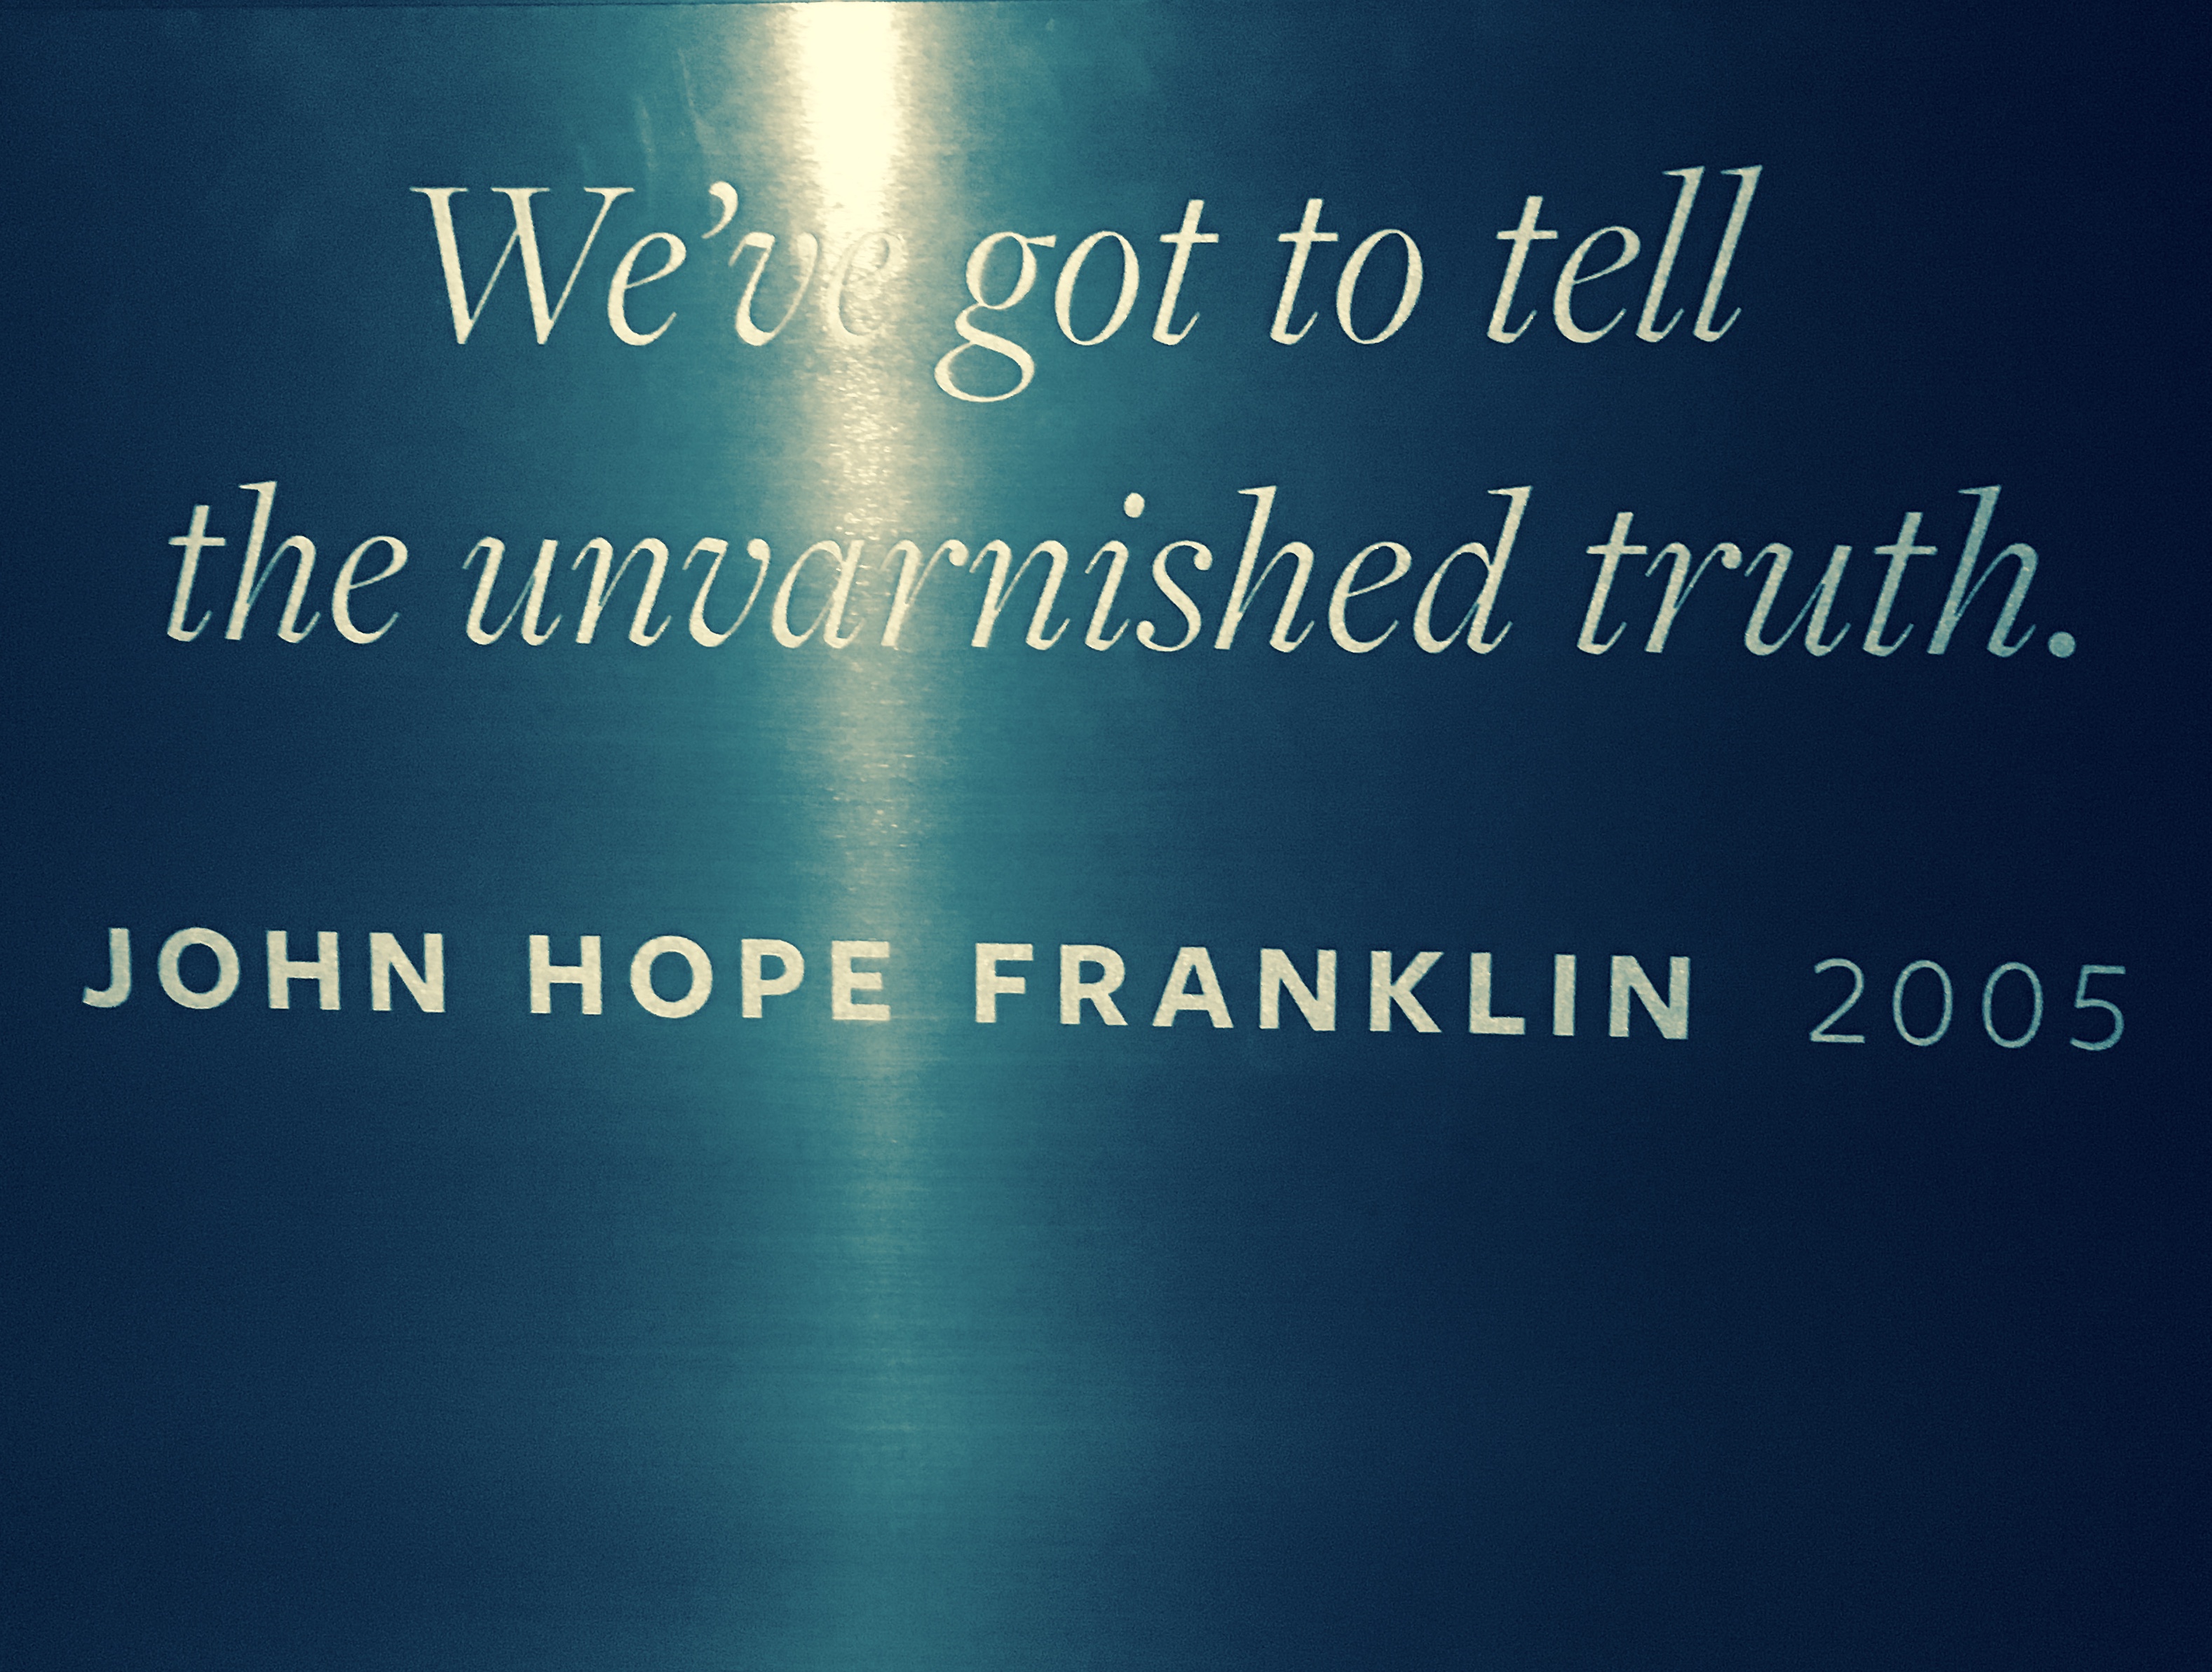 “We’ve got to tell the unvarnished truth.”